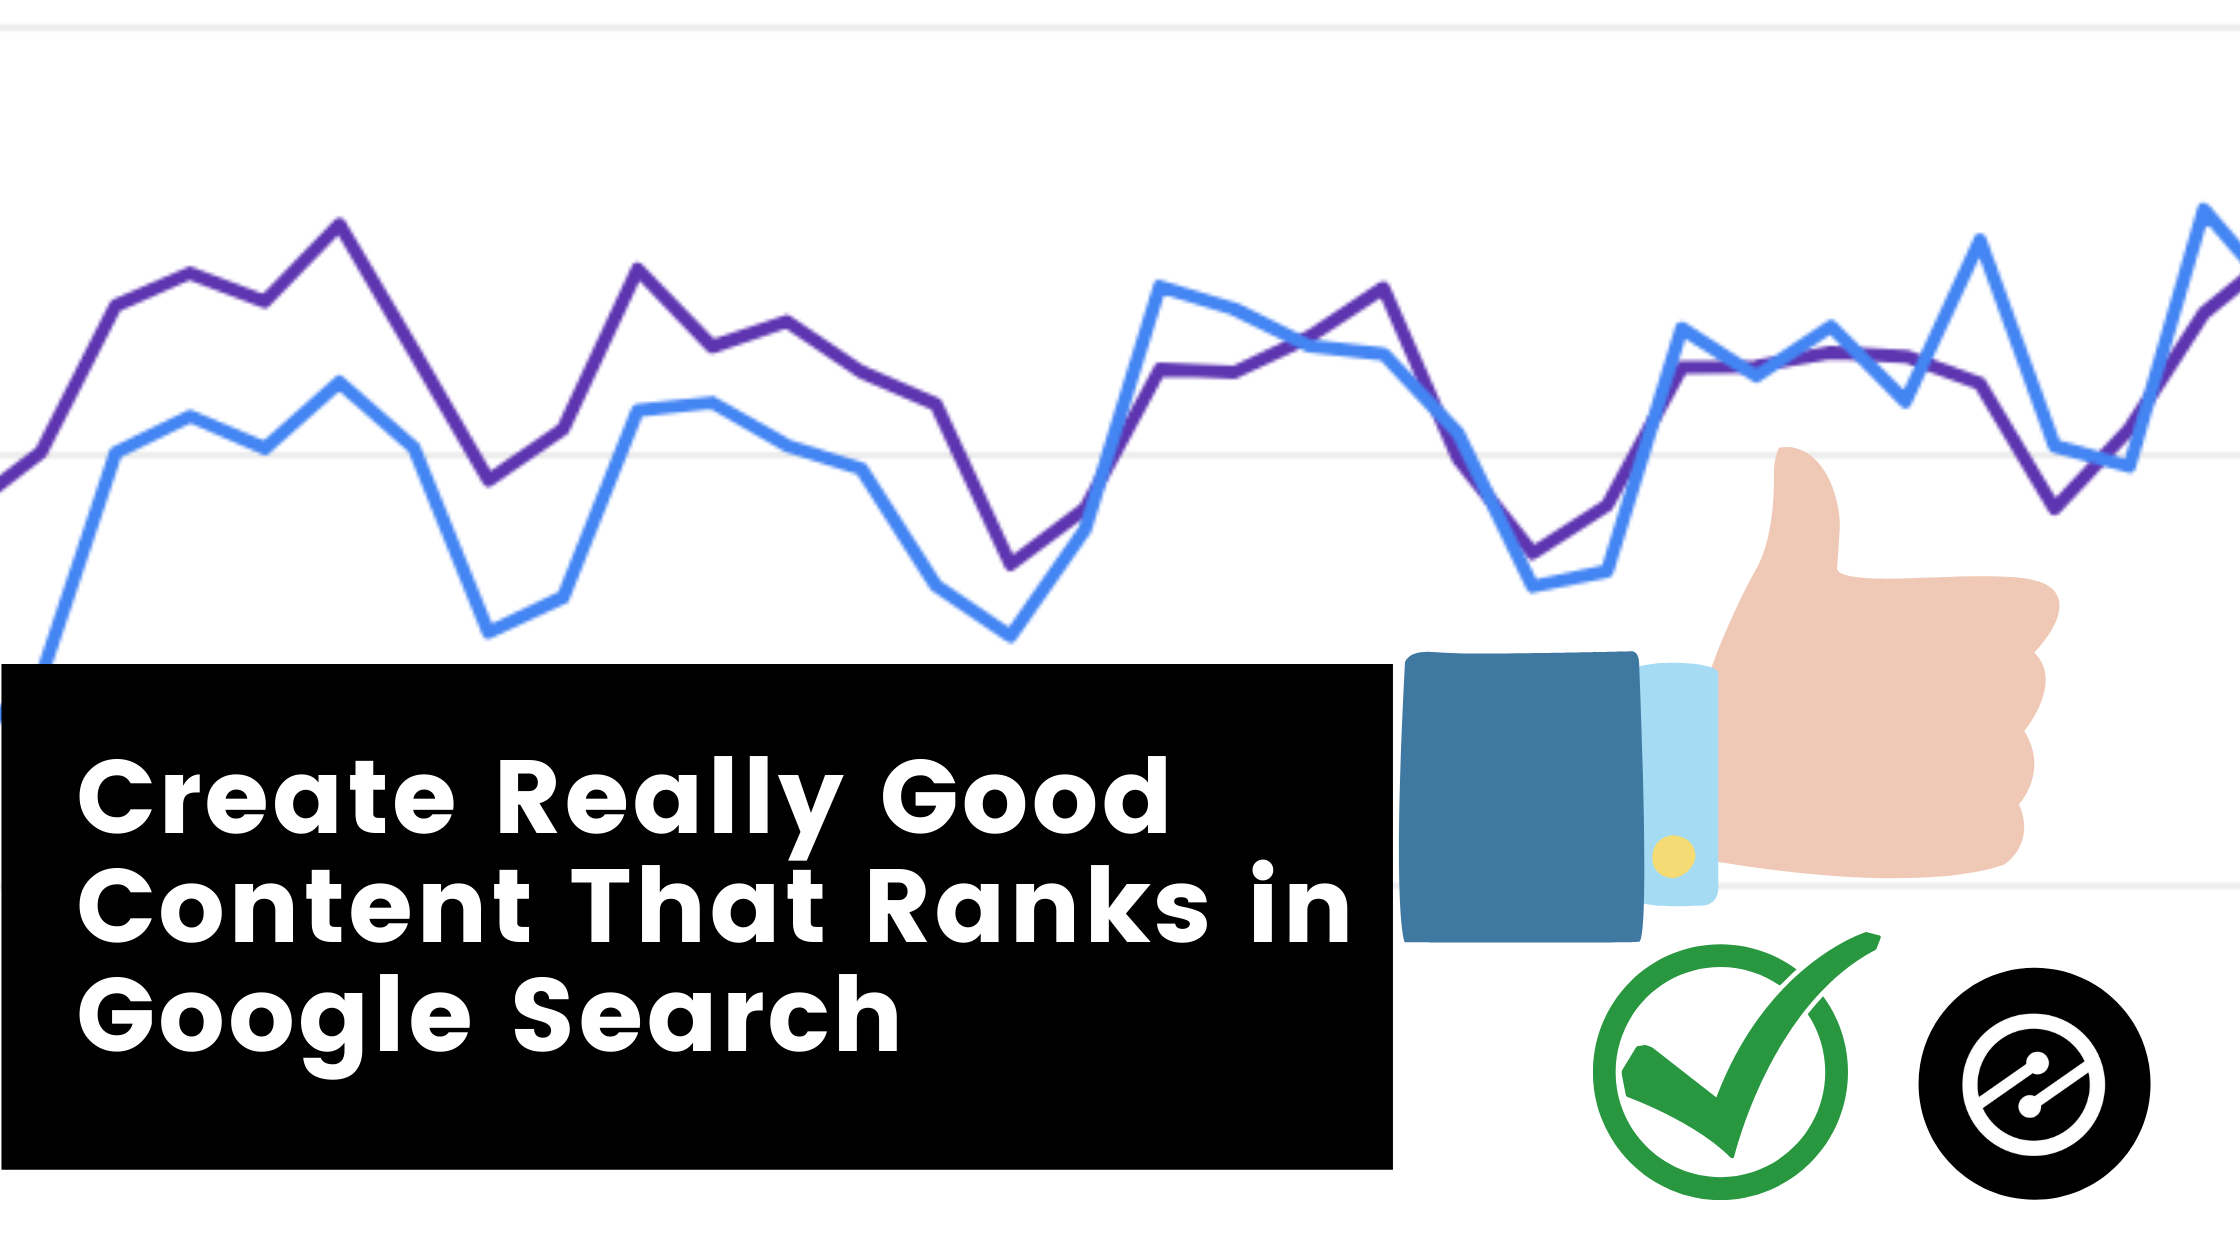 Create Really Good Content That Ranks in Google Search